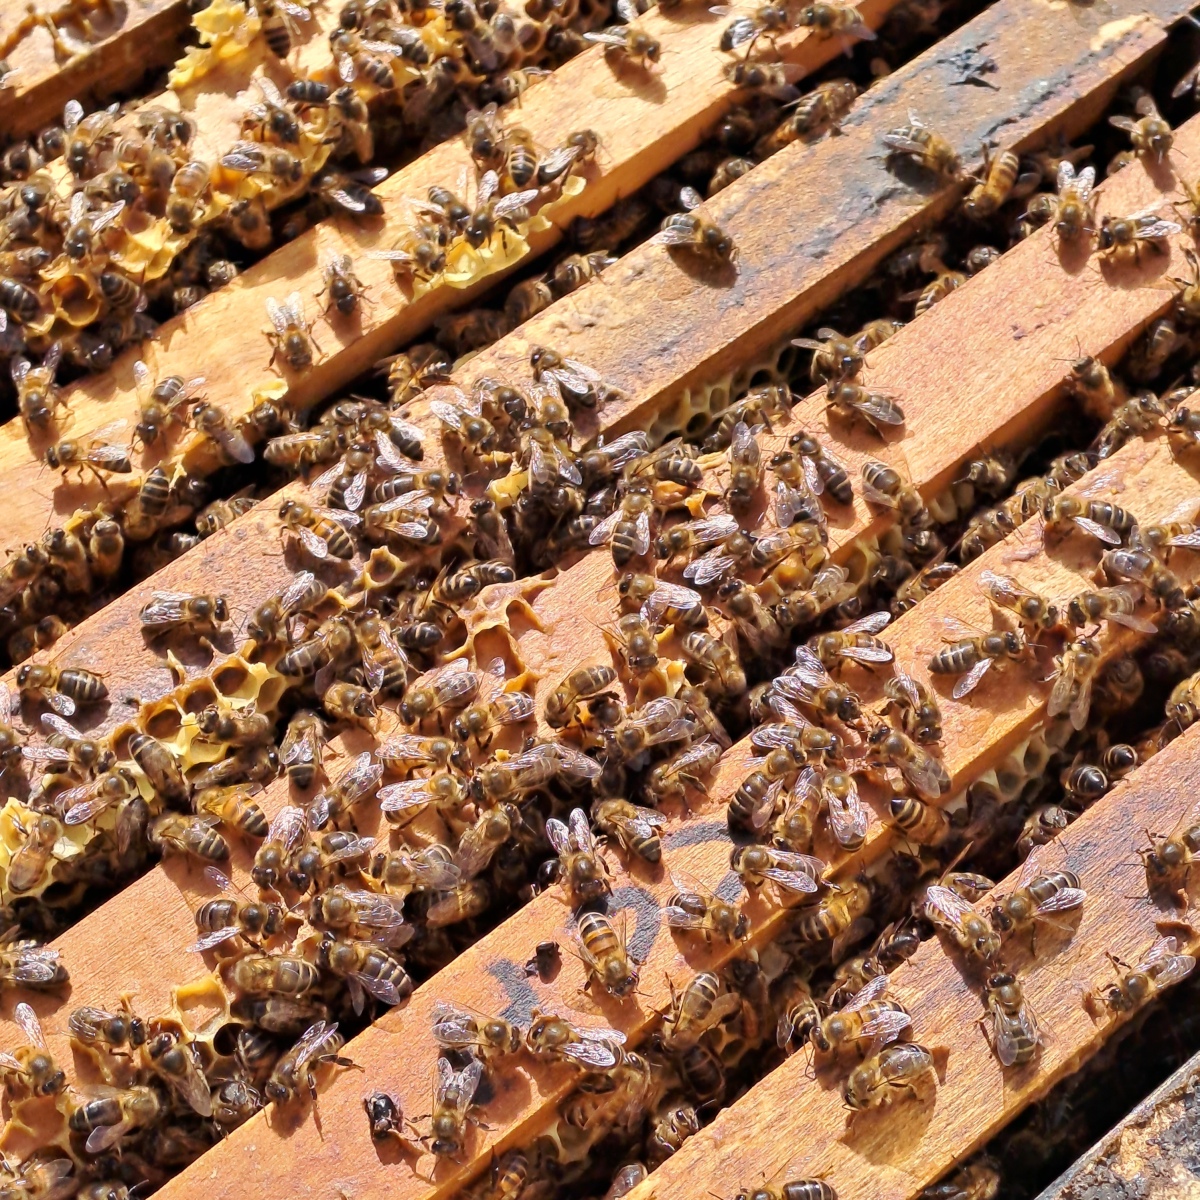 Protecting Native Honey Bees: A Shared Challenge for Malta and Ireland